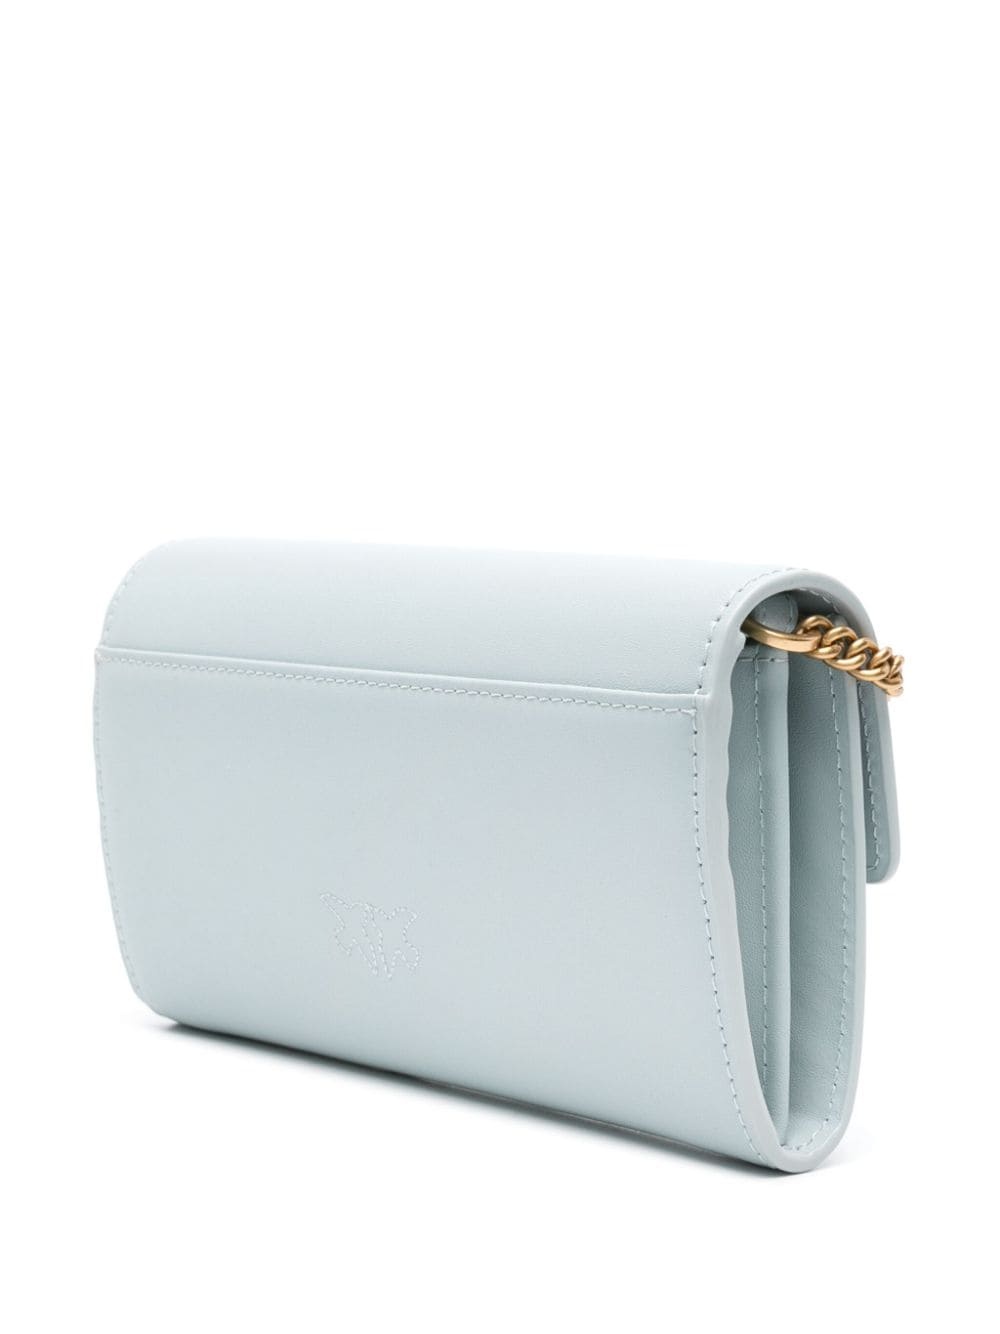 Love One leather clutch bag - 3